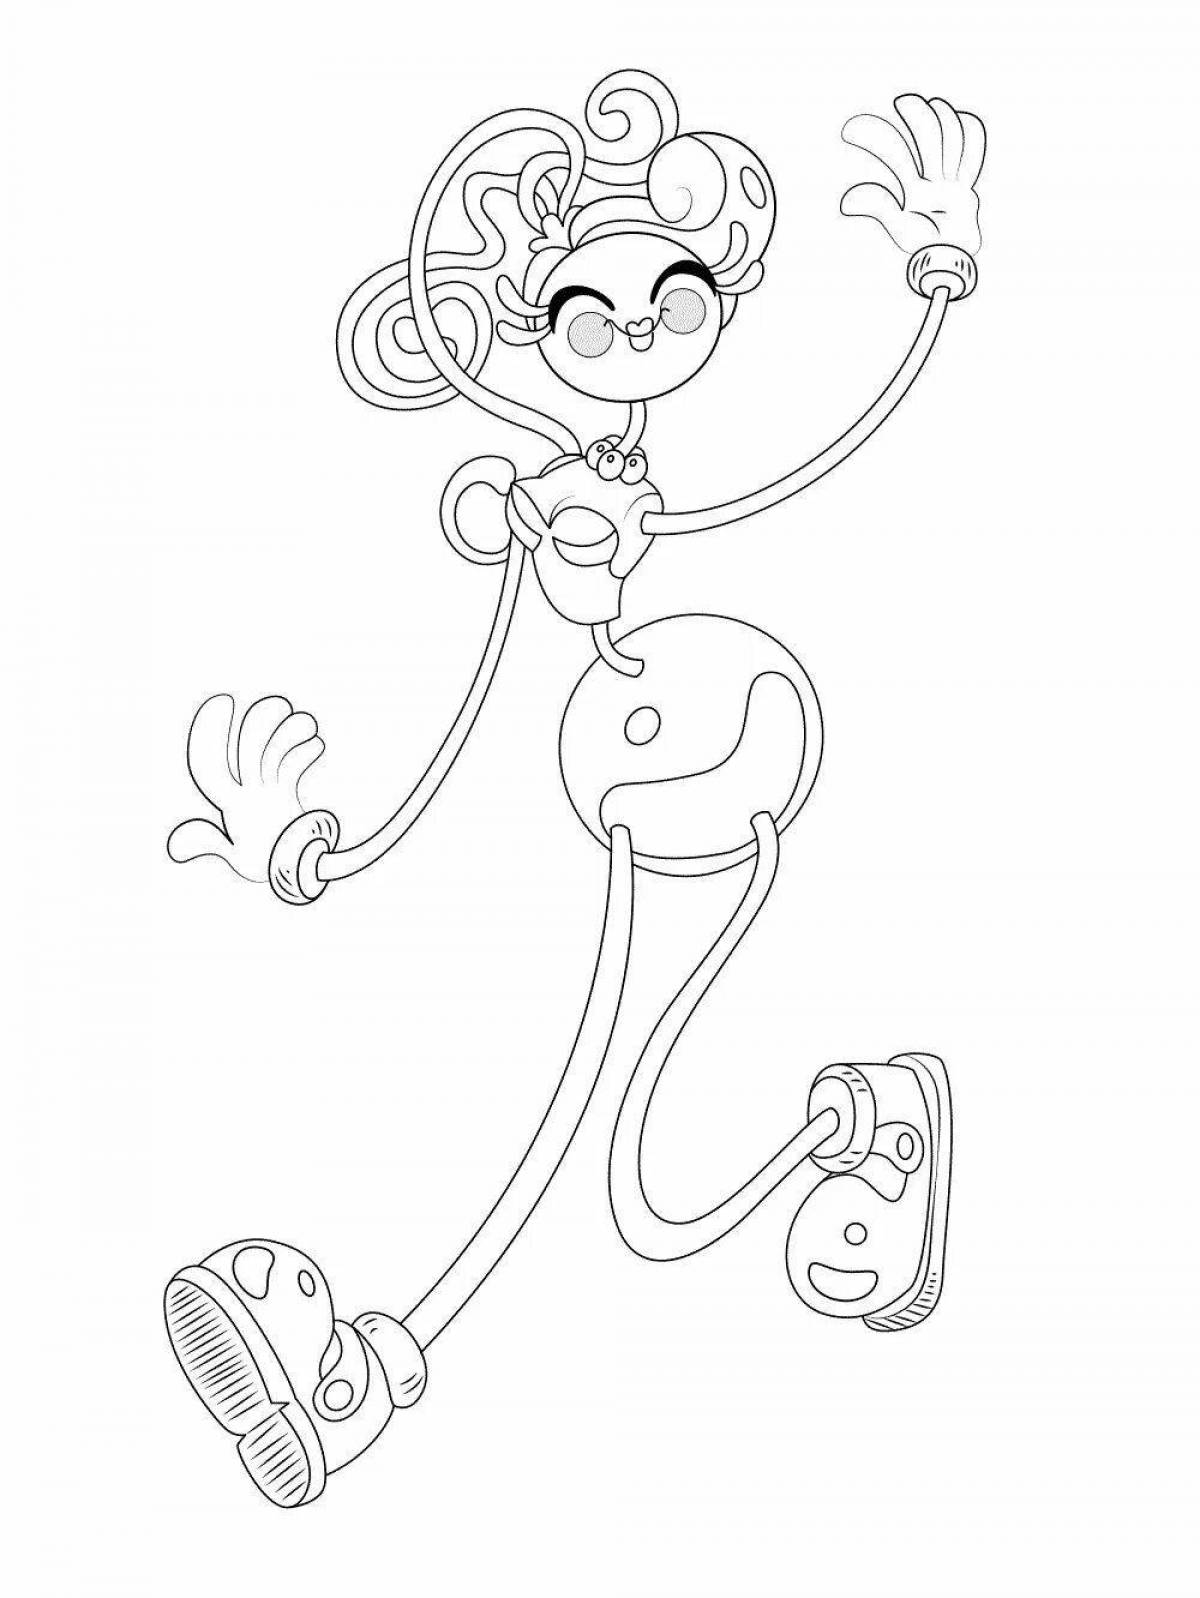 Coloring page glowing mommy with long legs